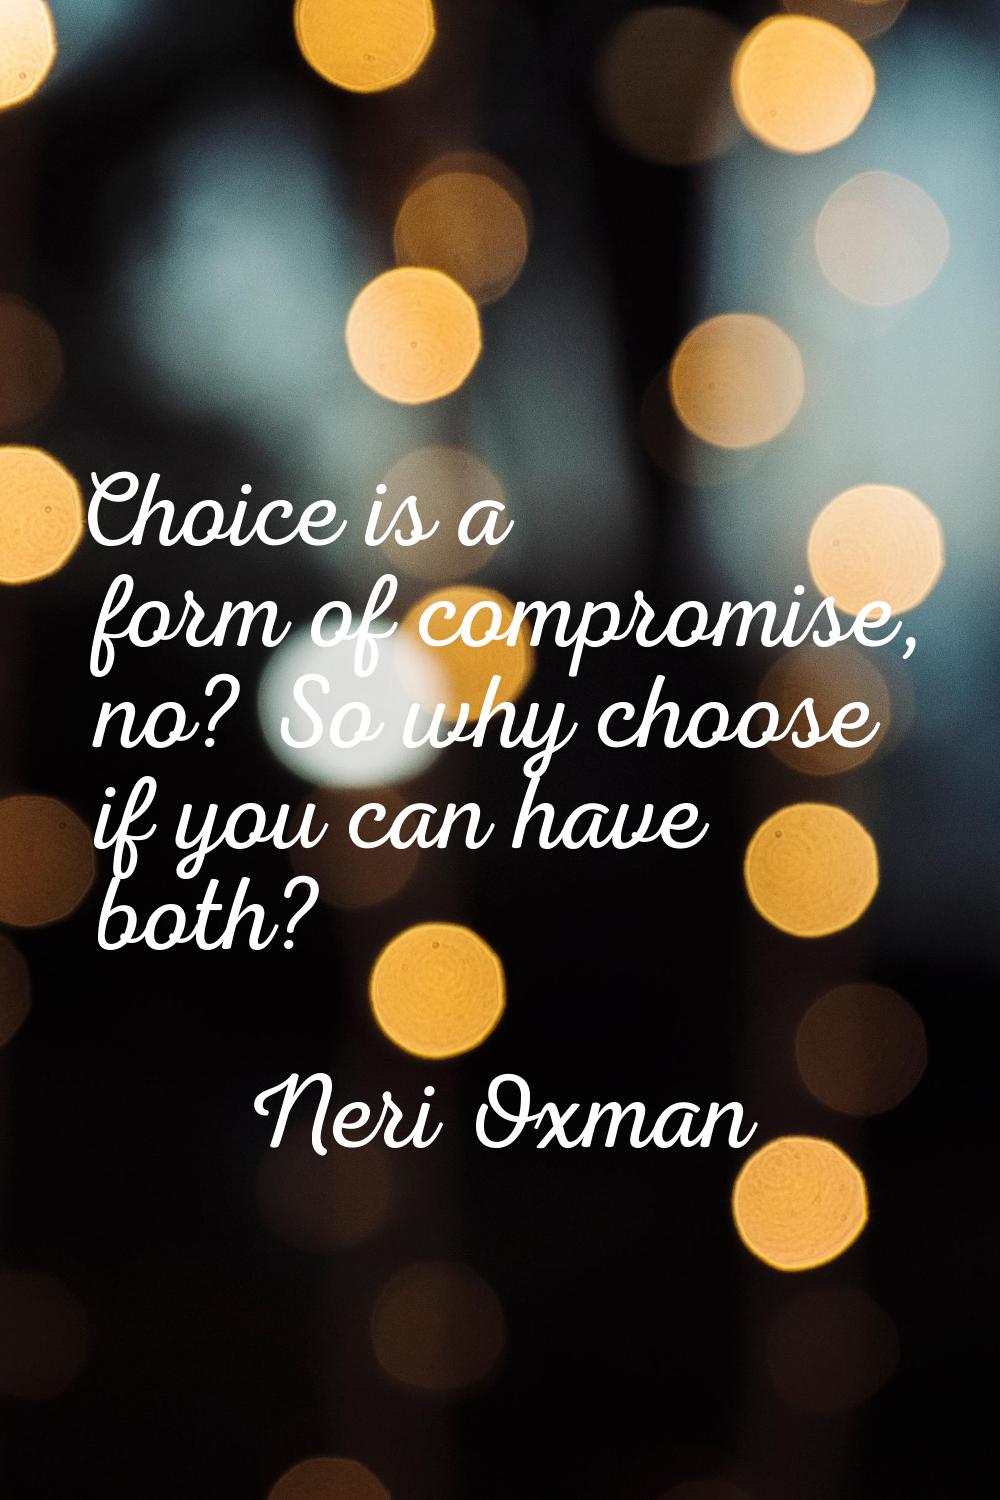 Choice is a form of compromise, no? So why choose if you can have both?